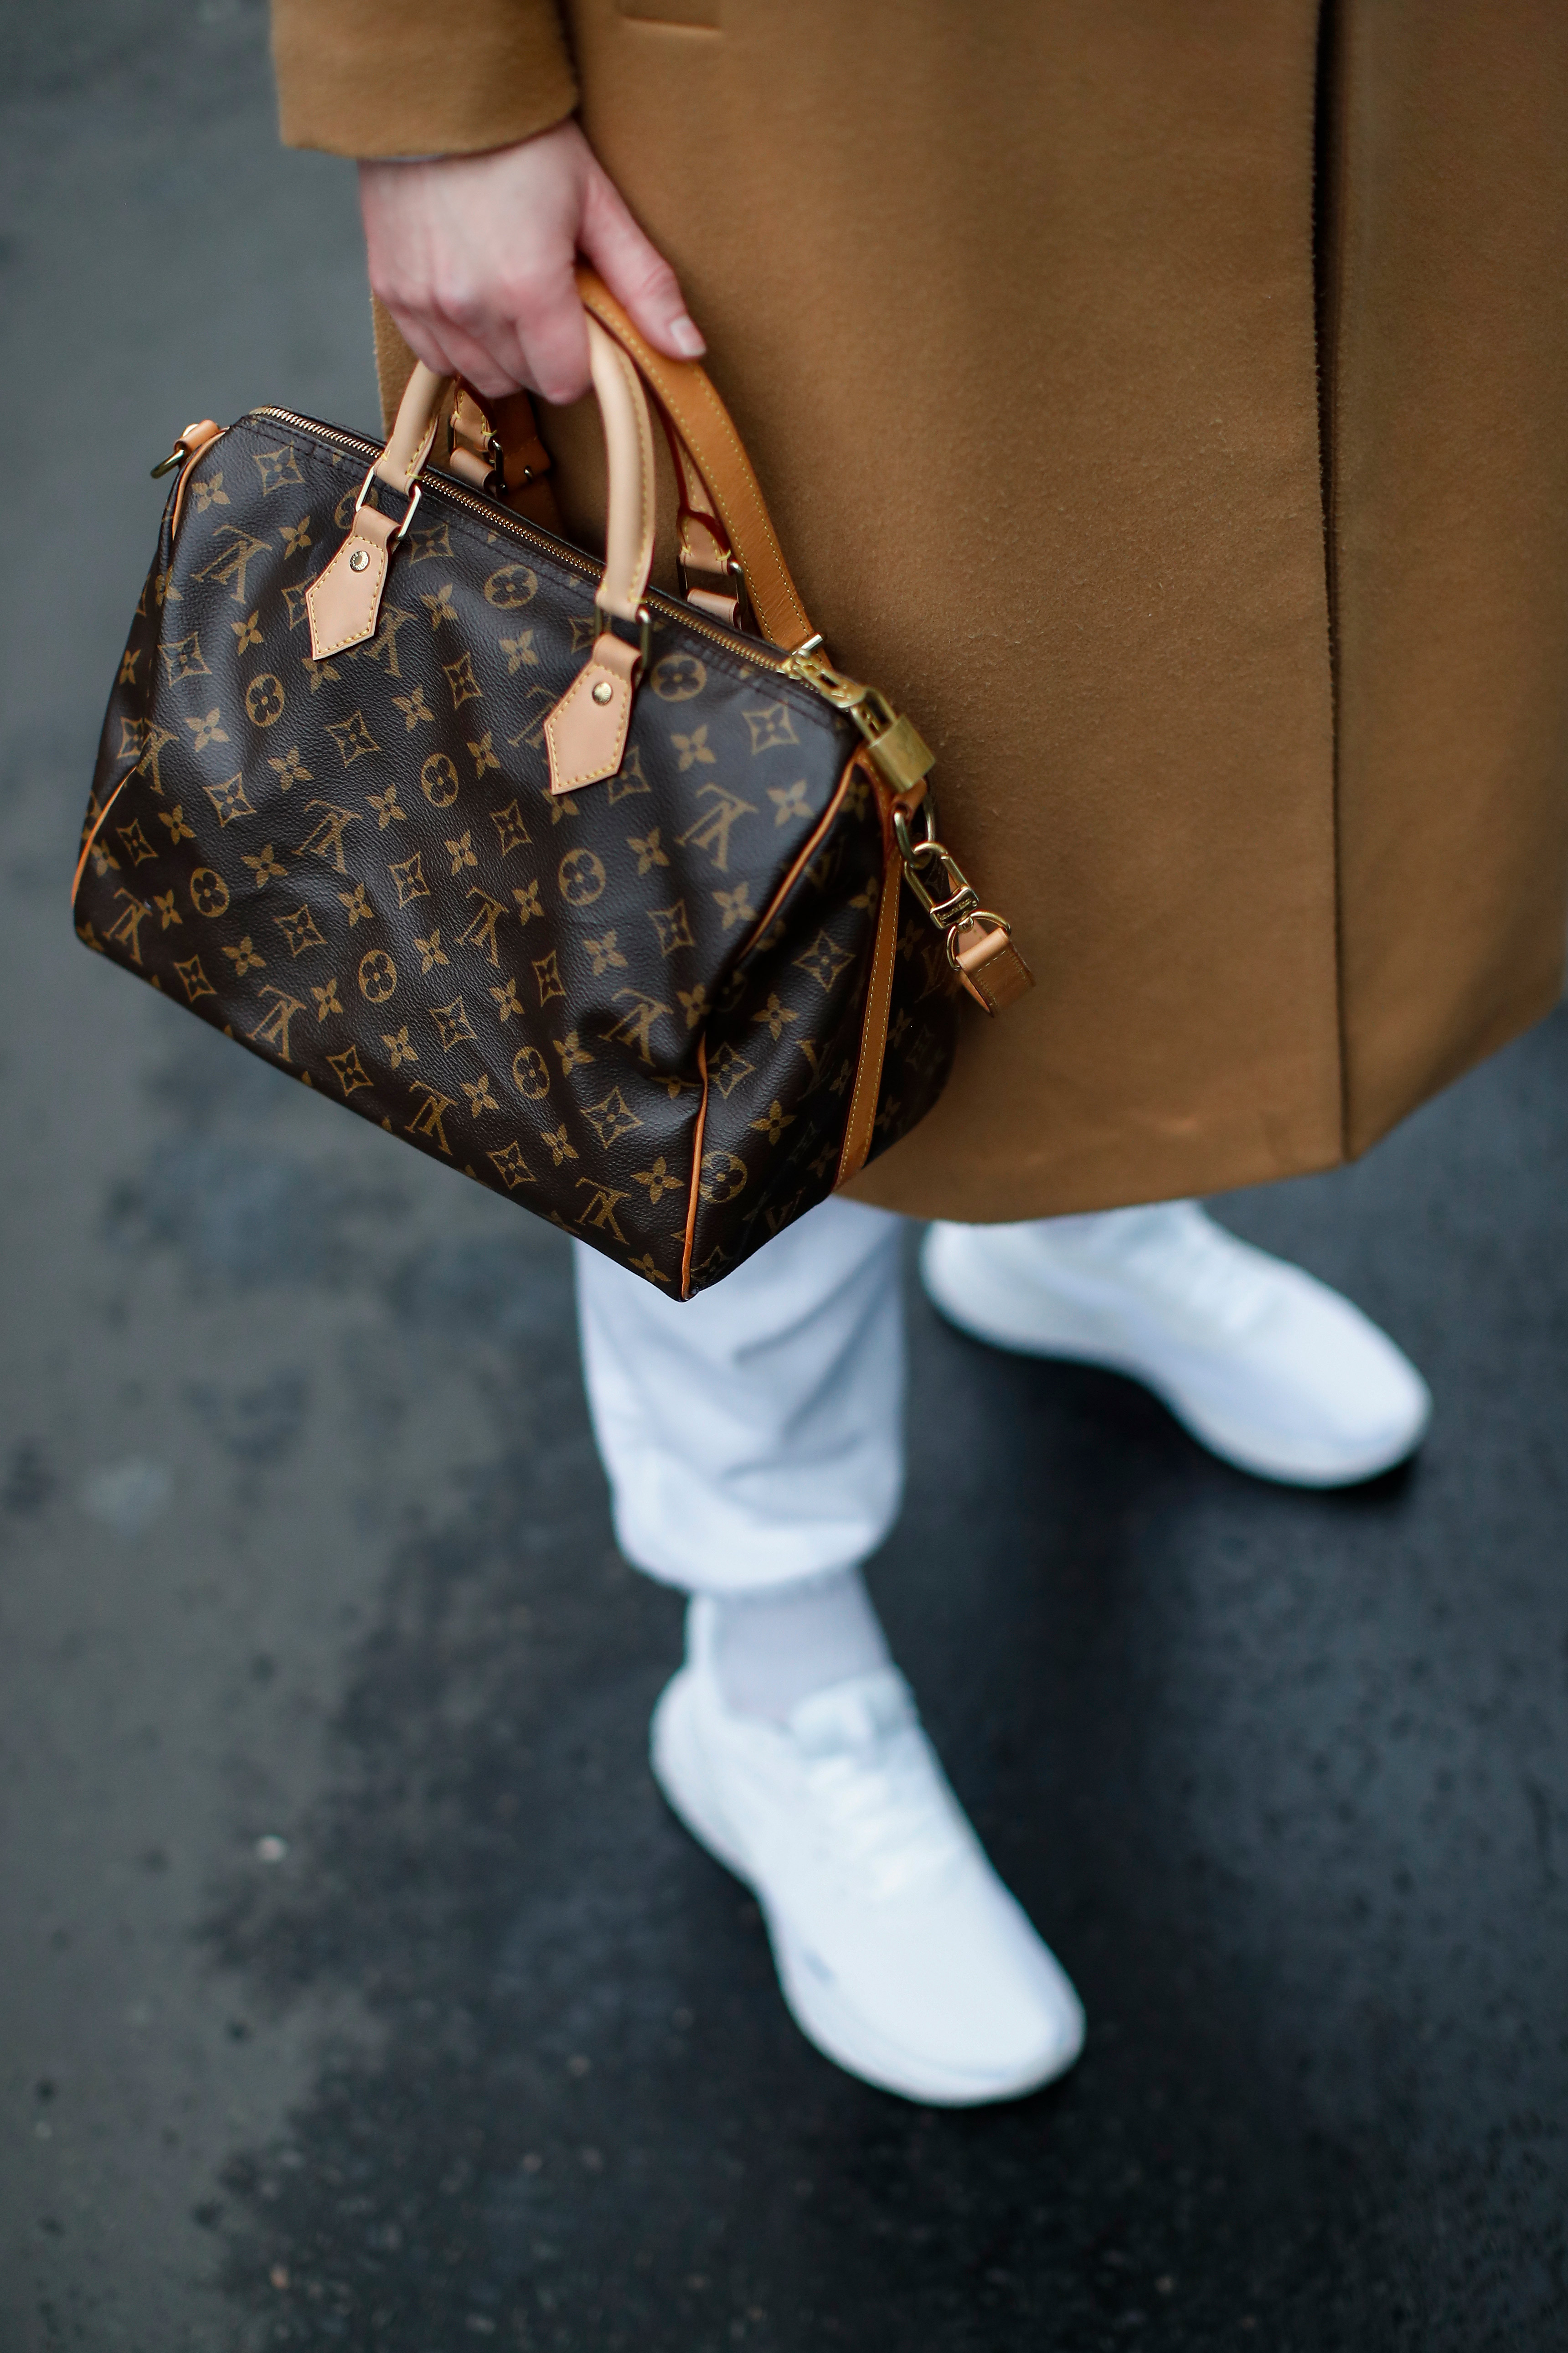 The Louis Vuitton Loop Bag Is an Ode to the Past  PurseBlog